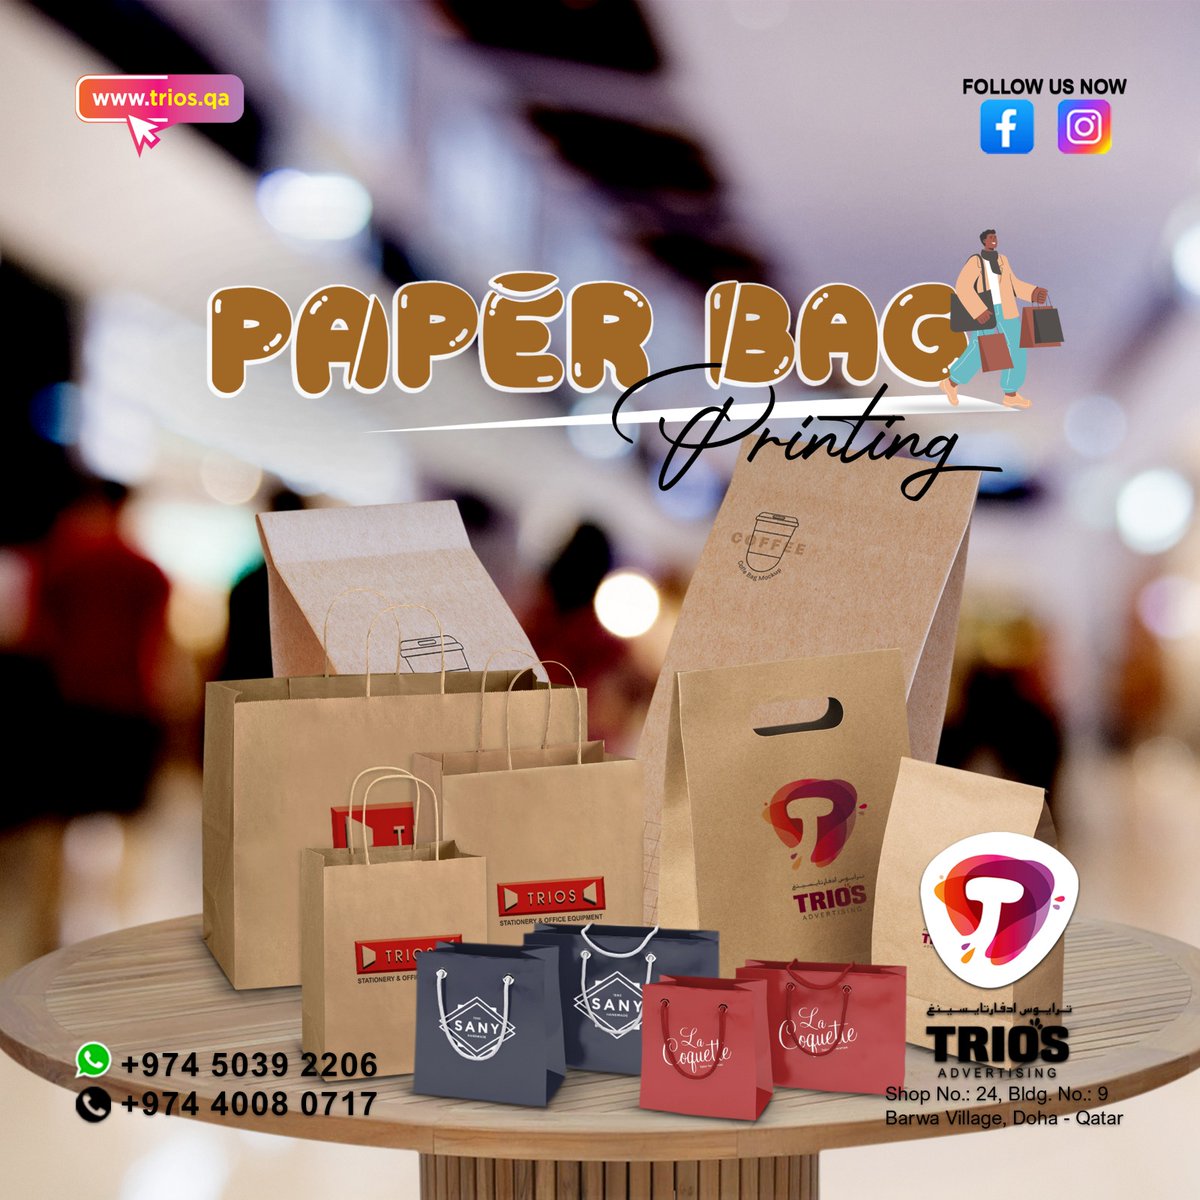 Trios Advertising in Qatar: Your go-to for custom paper bag printing.
.
Call Us : 50392206
.
#printing #paperbagmanufacturer #paperbagprinting #dohacity #dohaqatar2023
#bags #EcoFriendly #trending #viralnow #custompaperbag #shoppingbag
#paperbagcustom #packaging #paperbagolshop